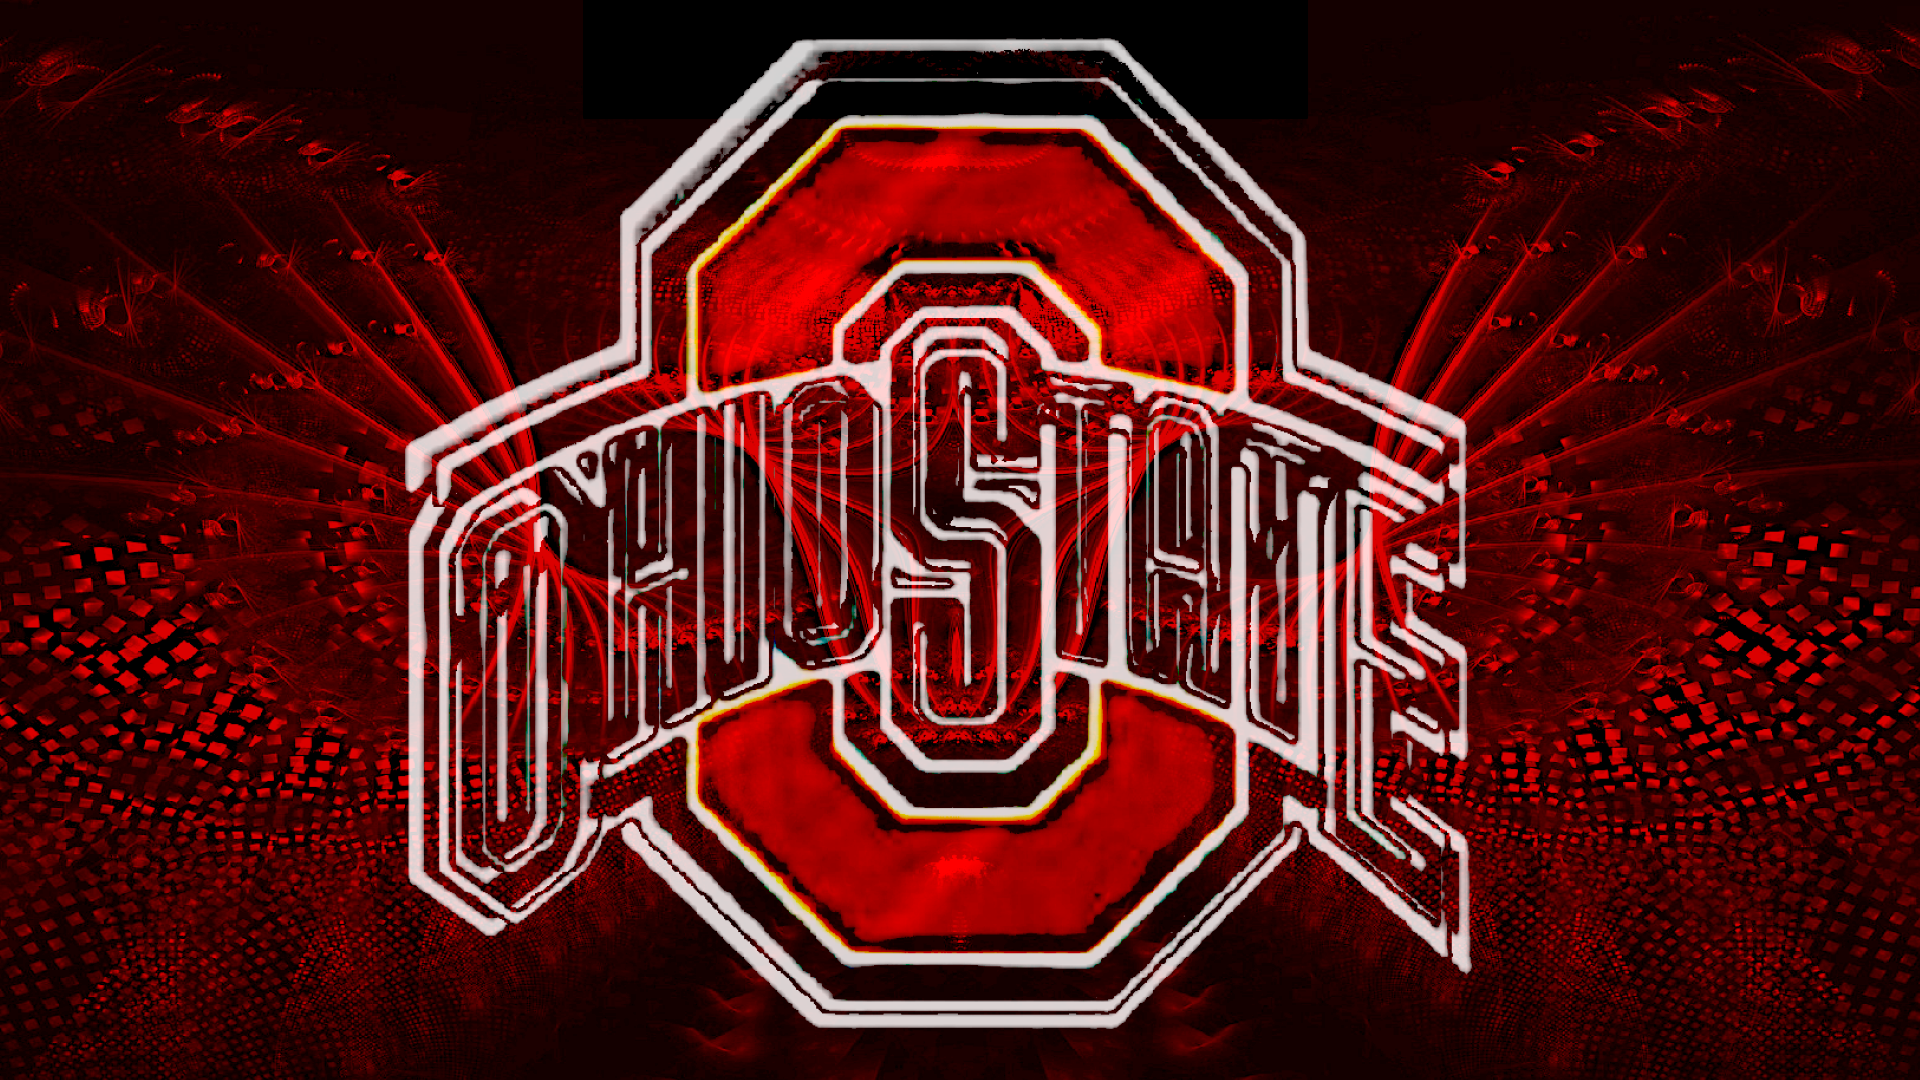 TRANSPARENT RED OHIO STATE - Ohio State Football Wallpaper ...